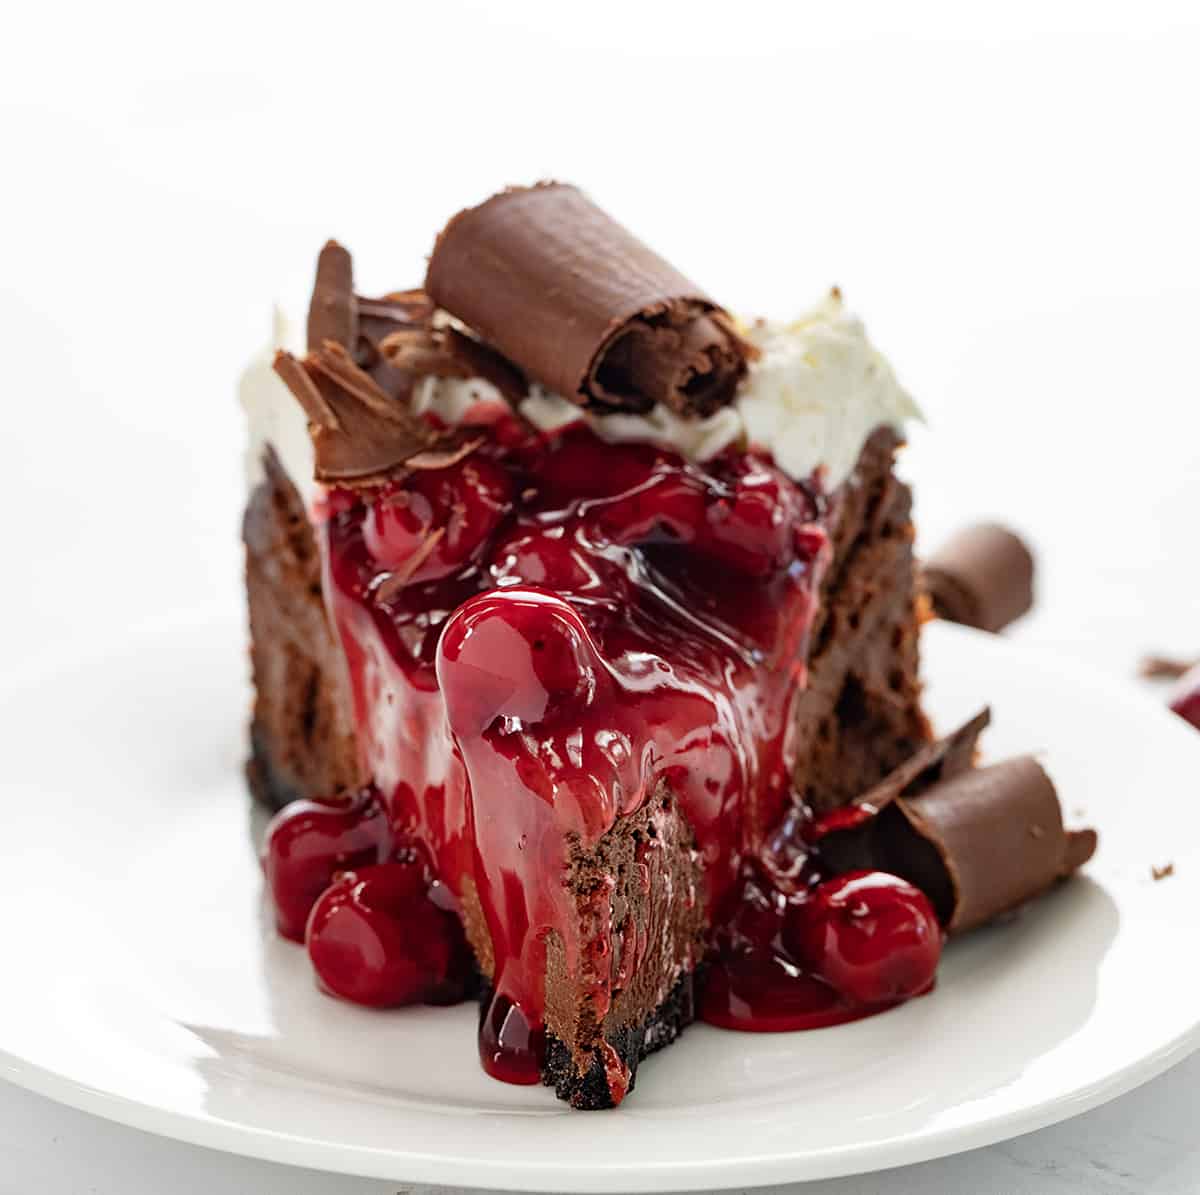 One Piece of Black Forest Cheesecake on a White Plate and Backlit.